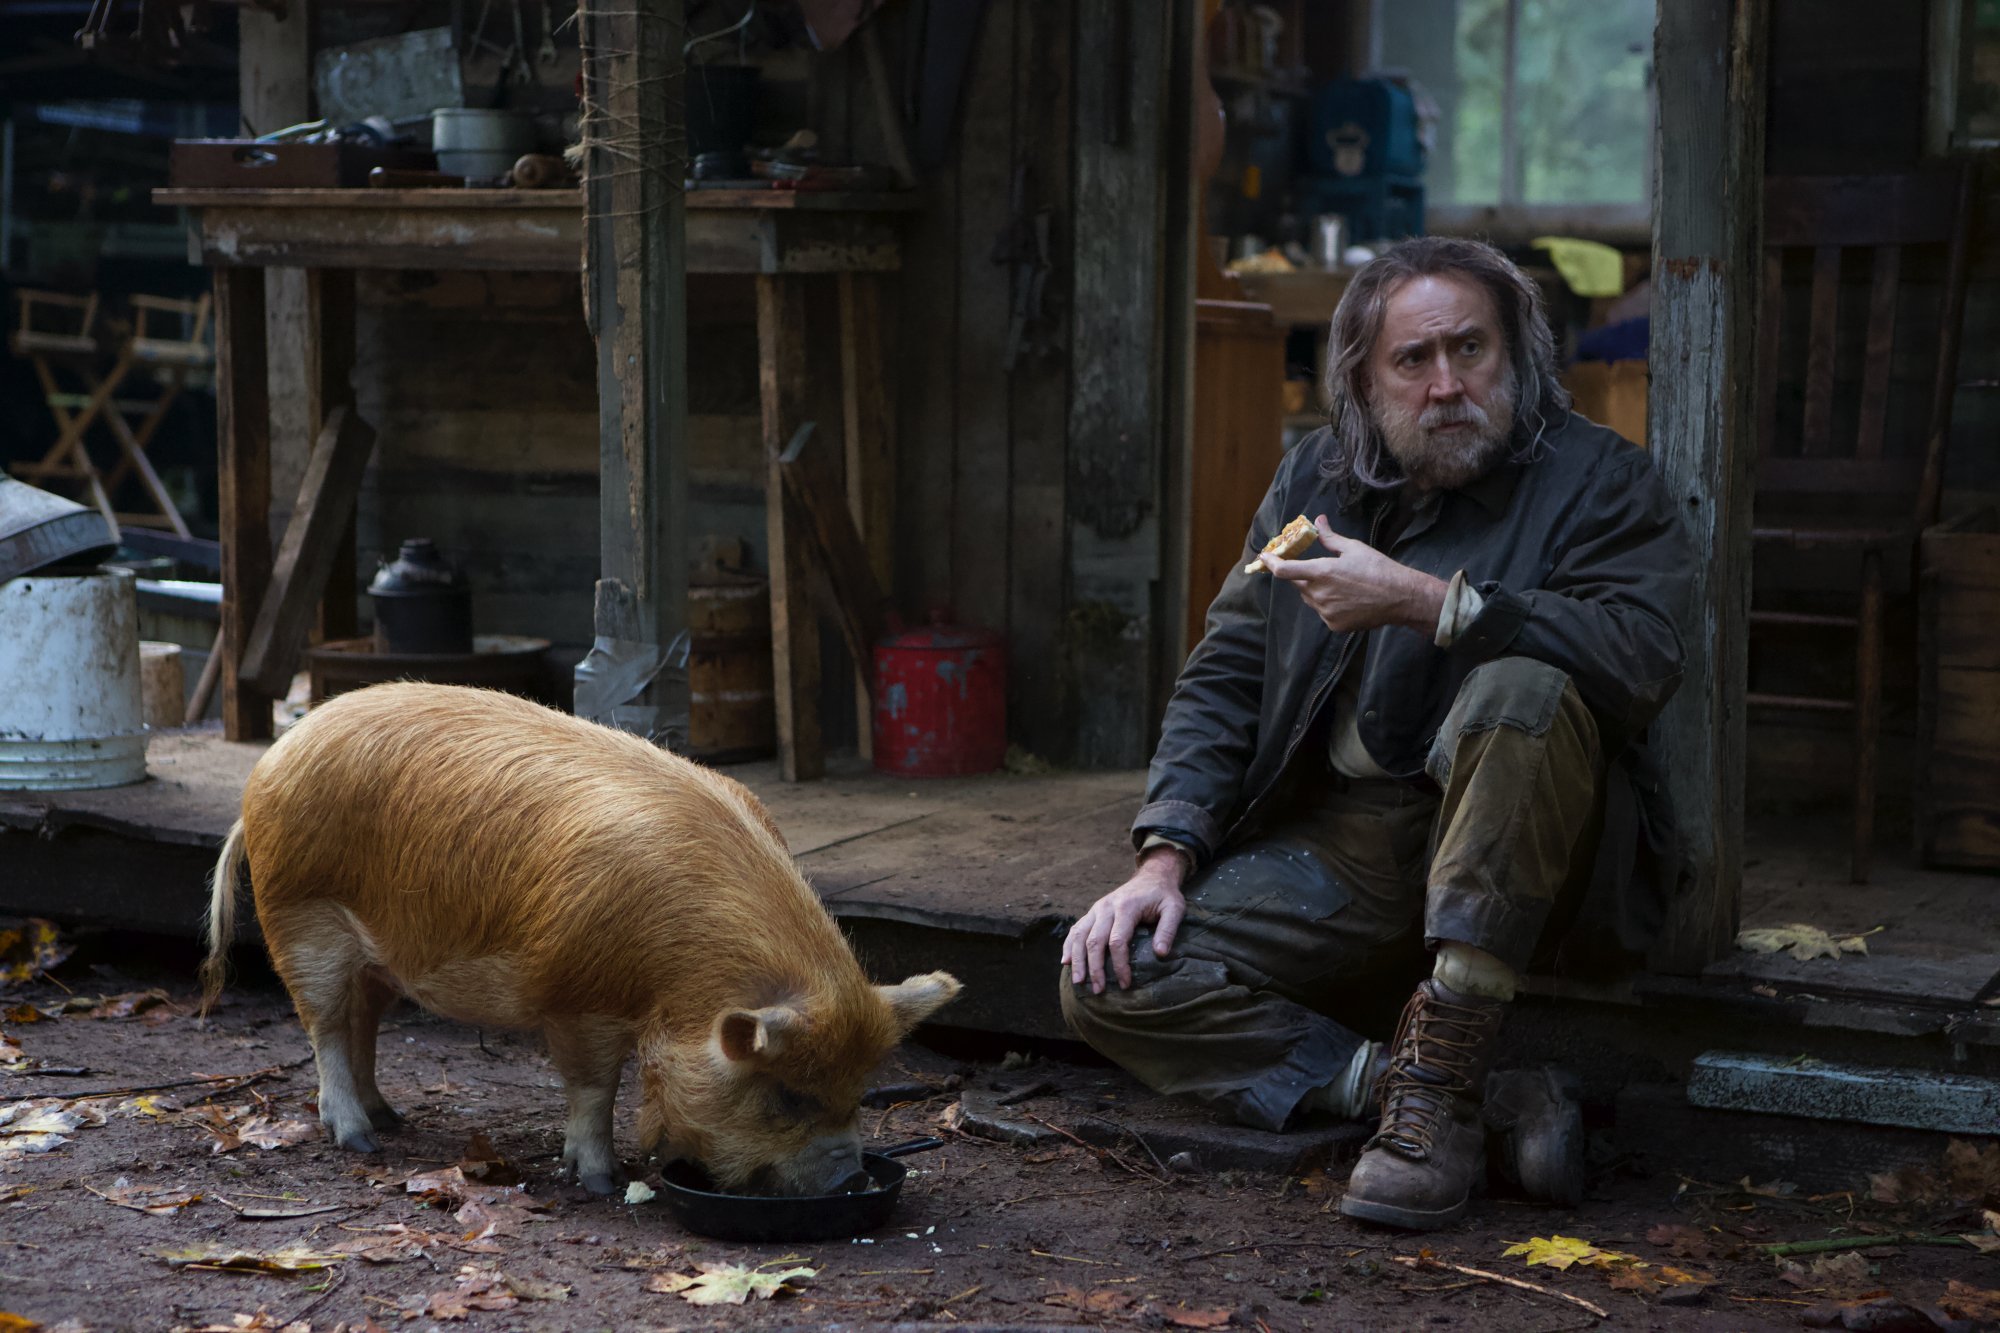 'Pig' Nicolas Cage as Rob sitting next to his pig and eating